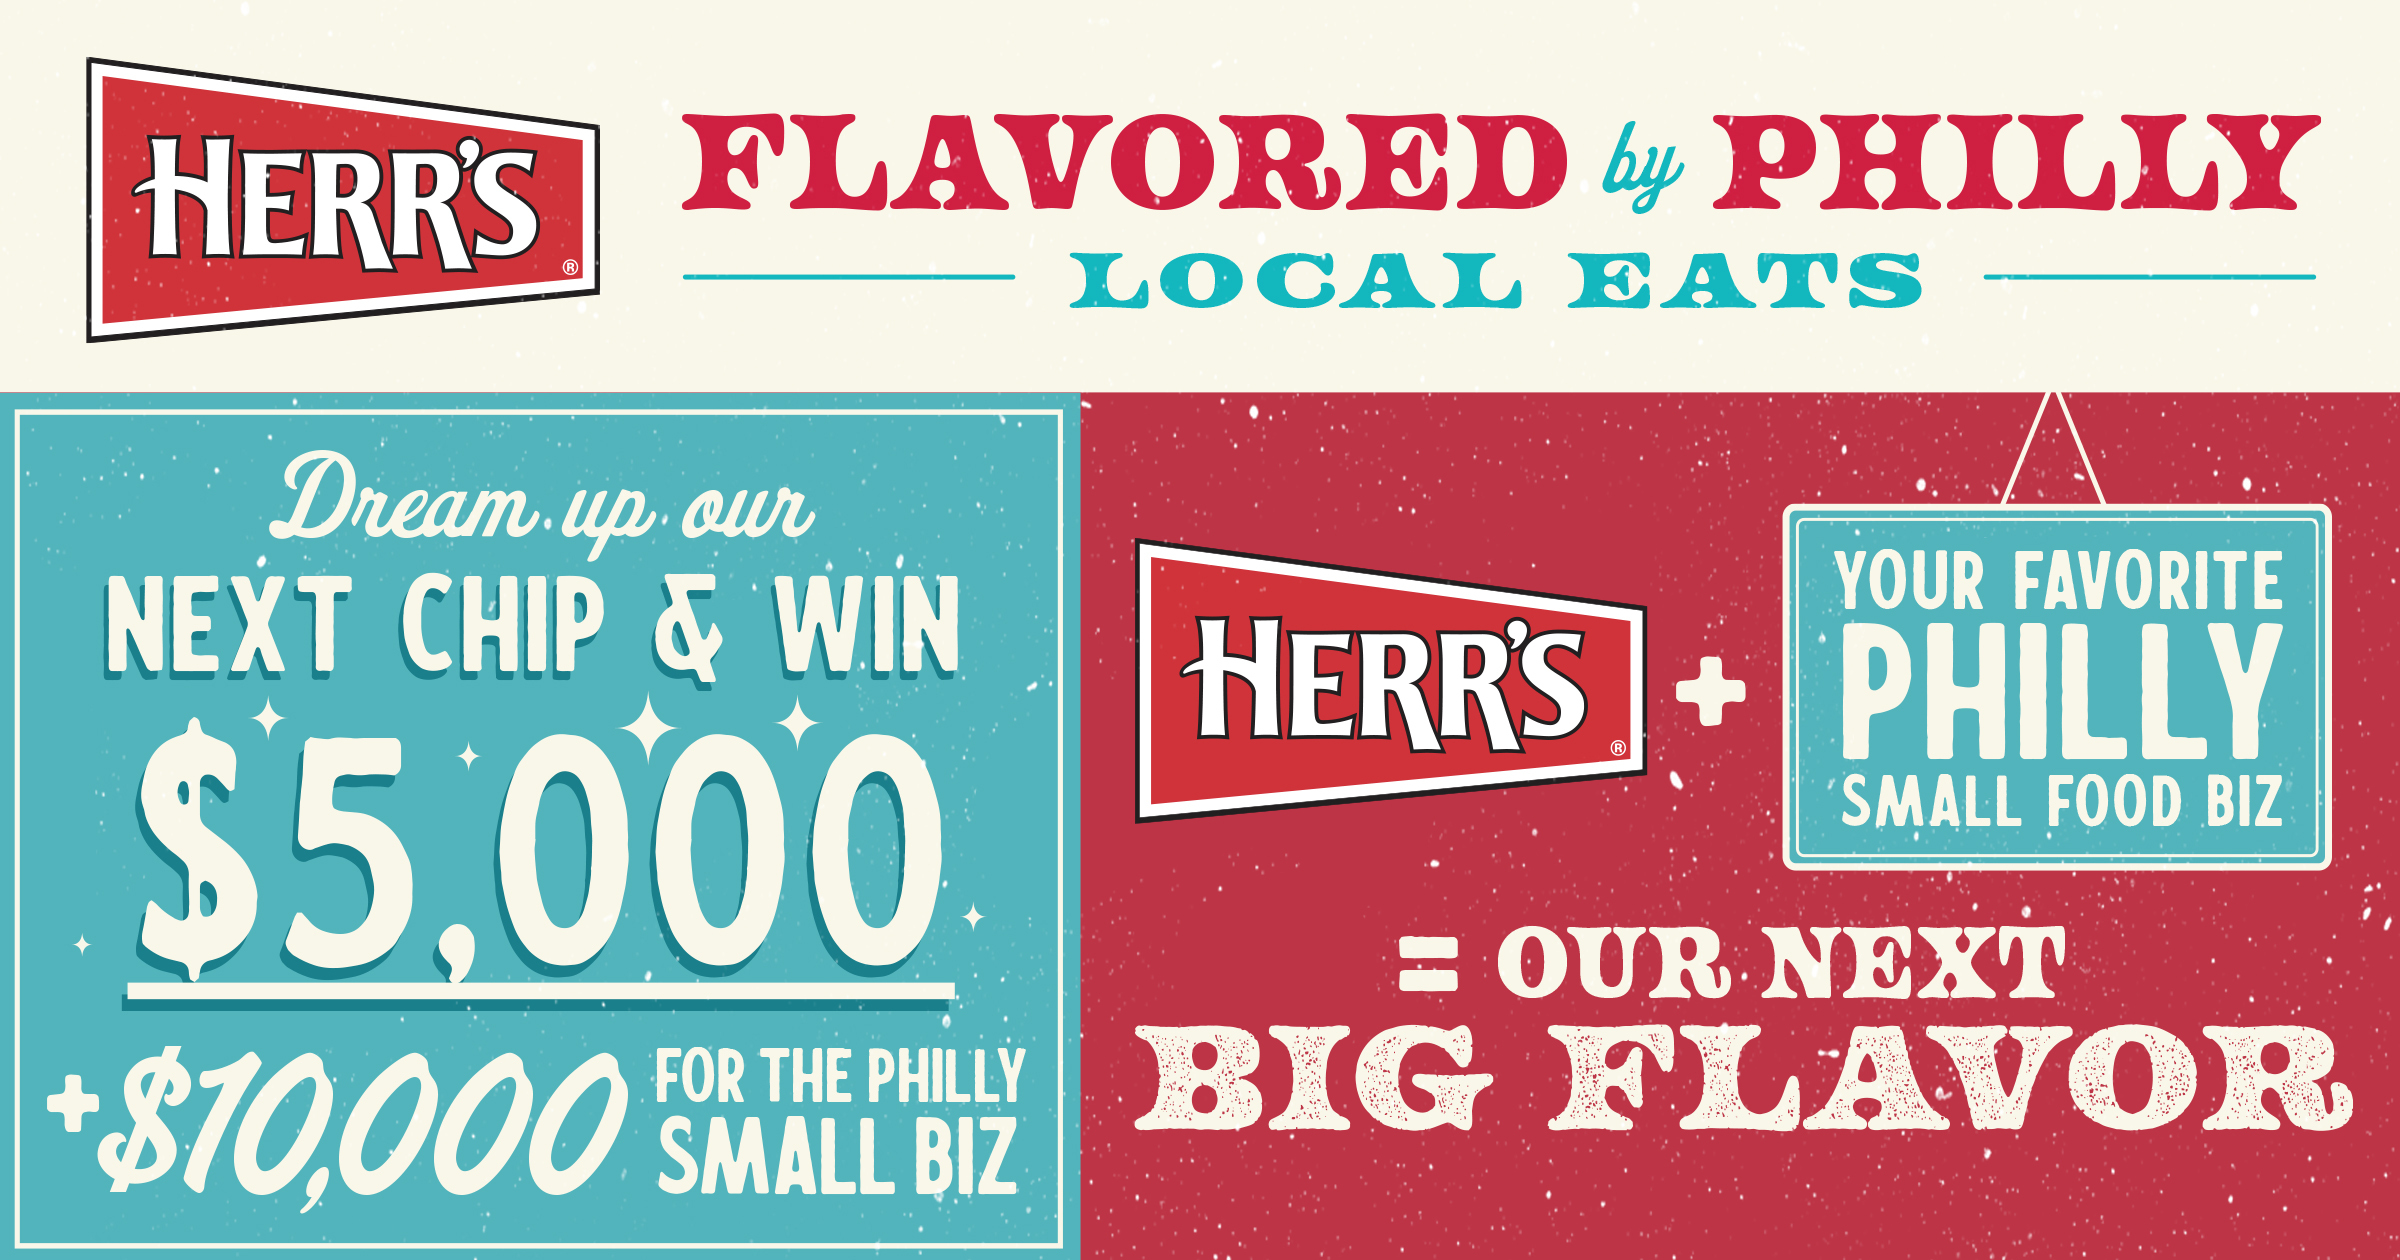 Herr’s Flavored by Philly contest seeks beloved local flavors